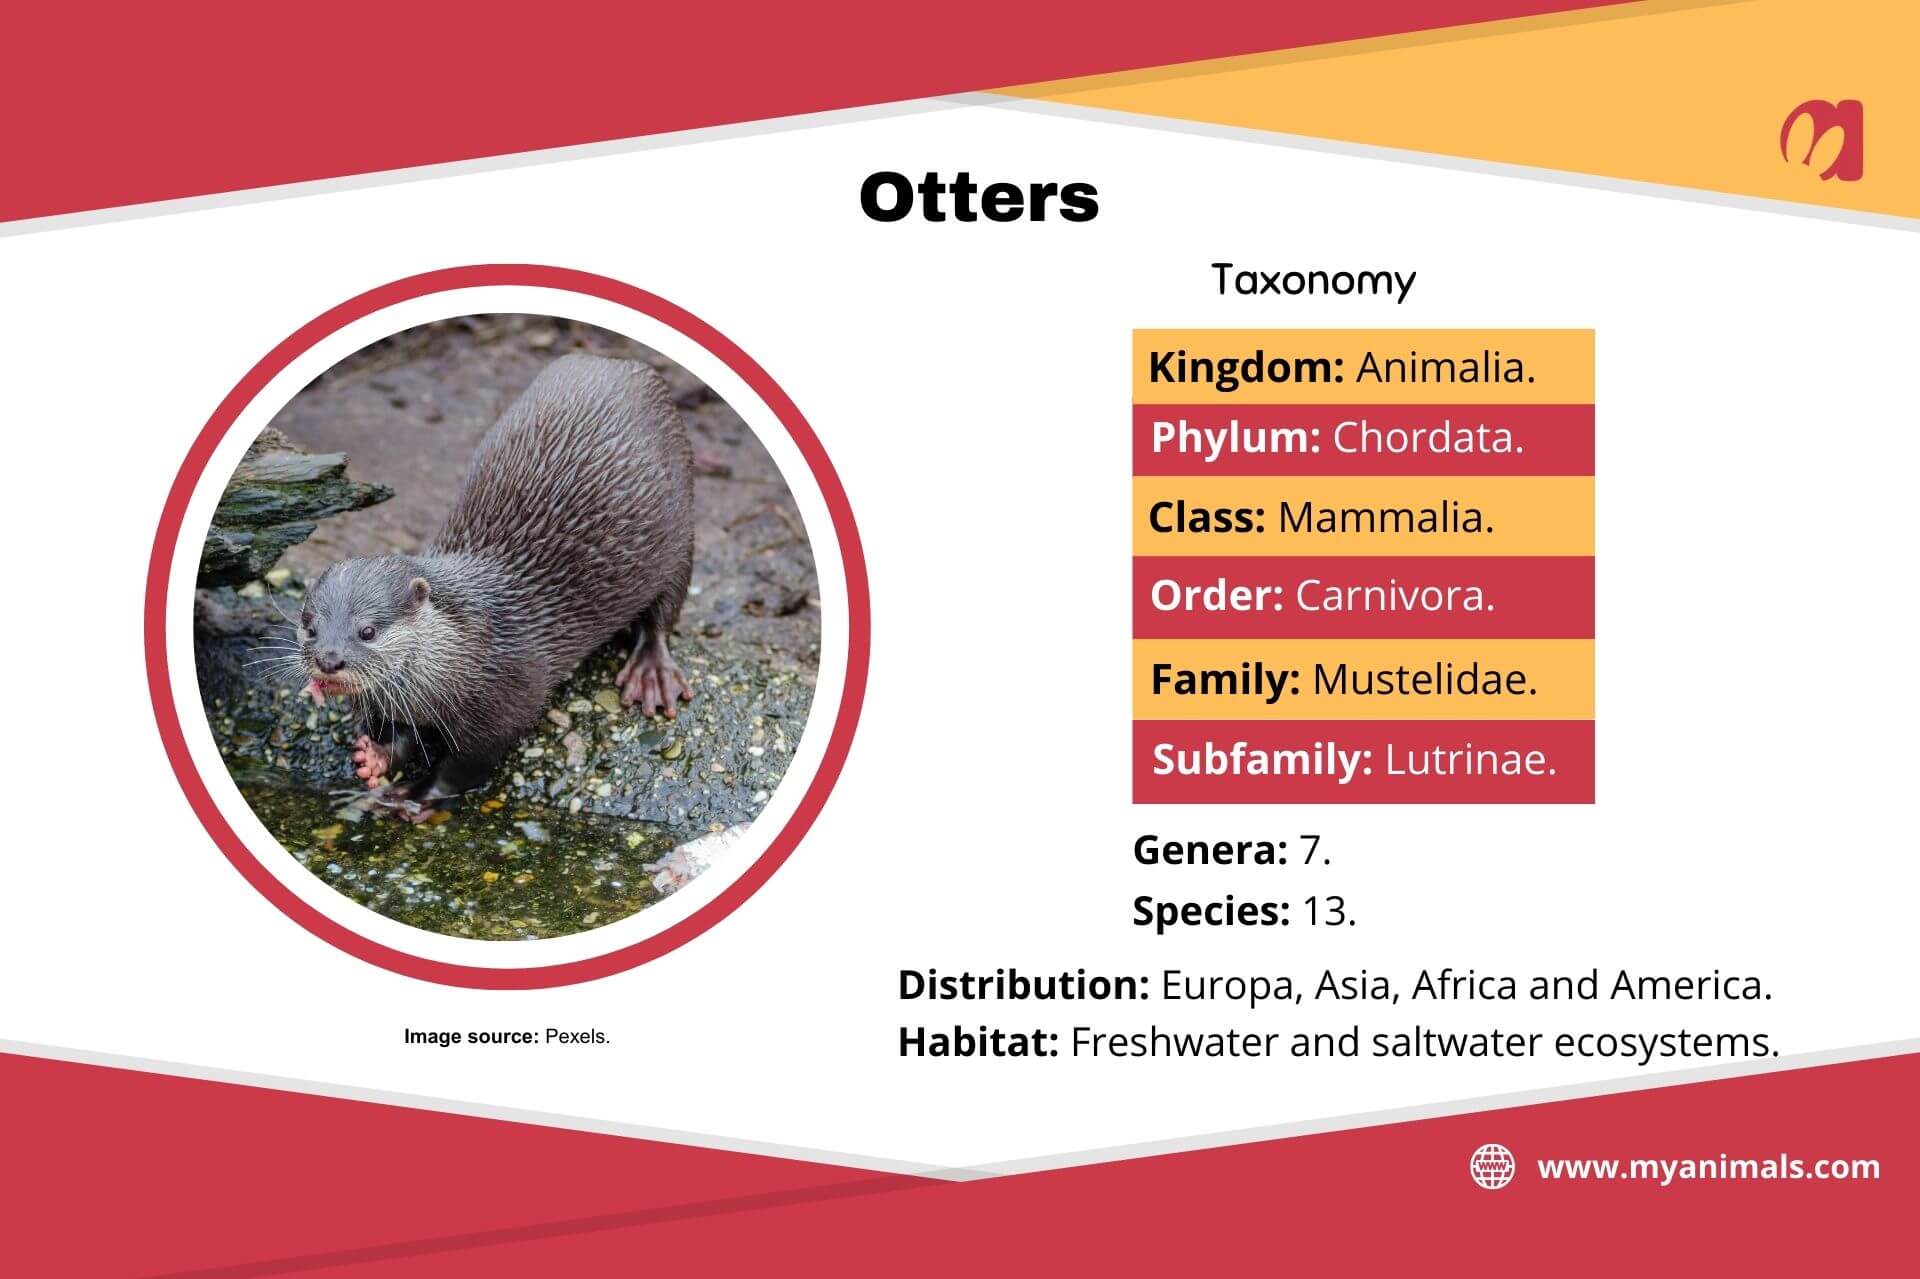 The taxonomy of otters.